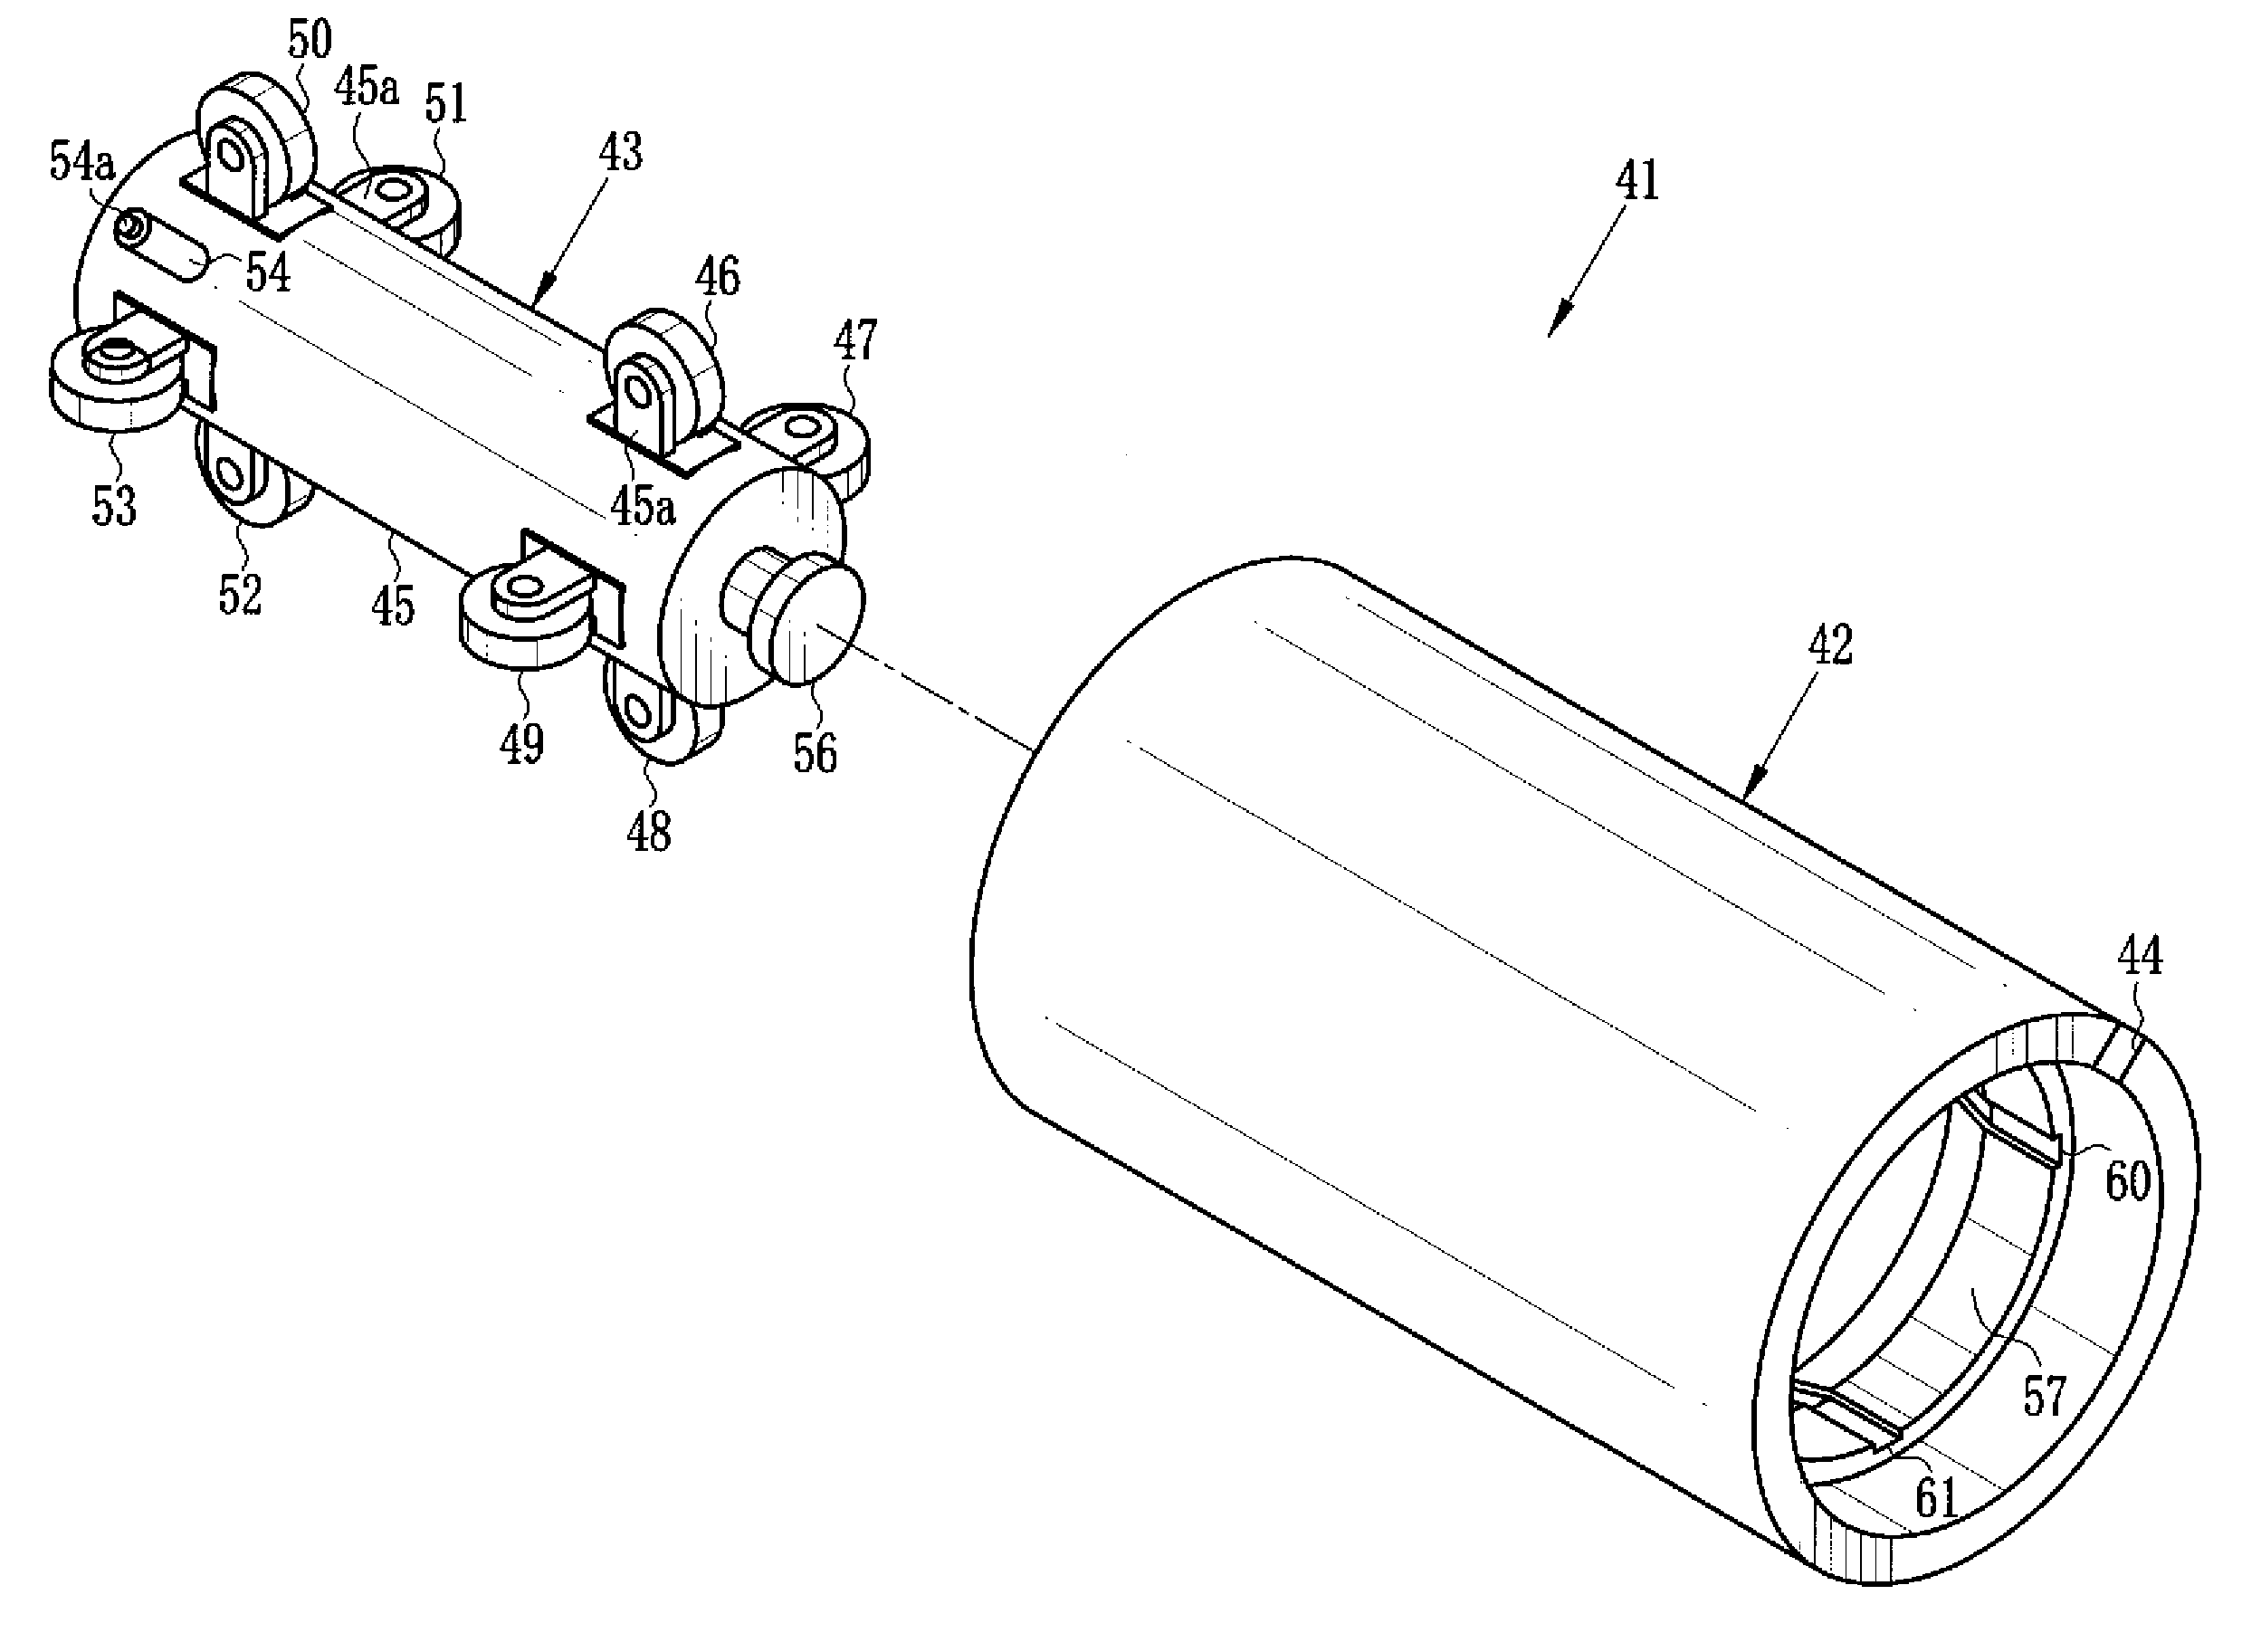 Core assembly for winding sheet and winding method